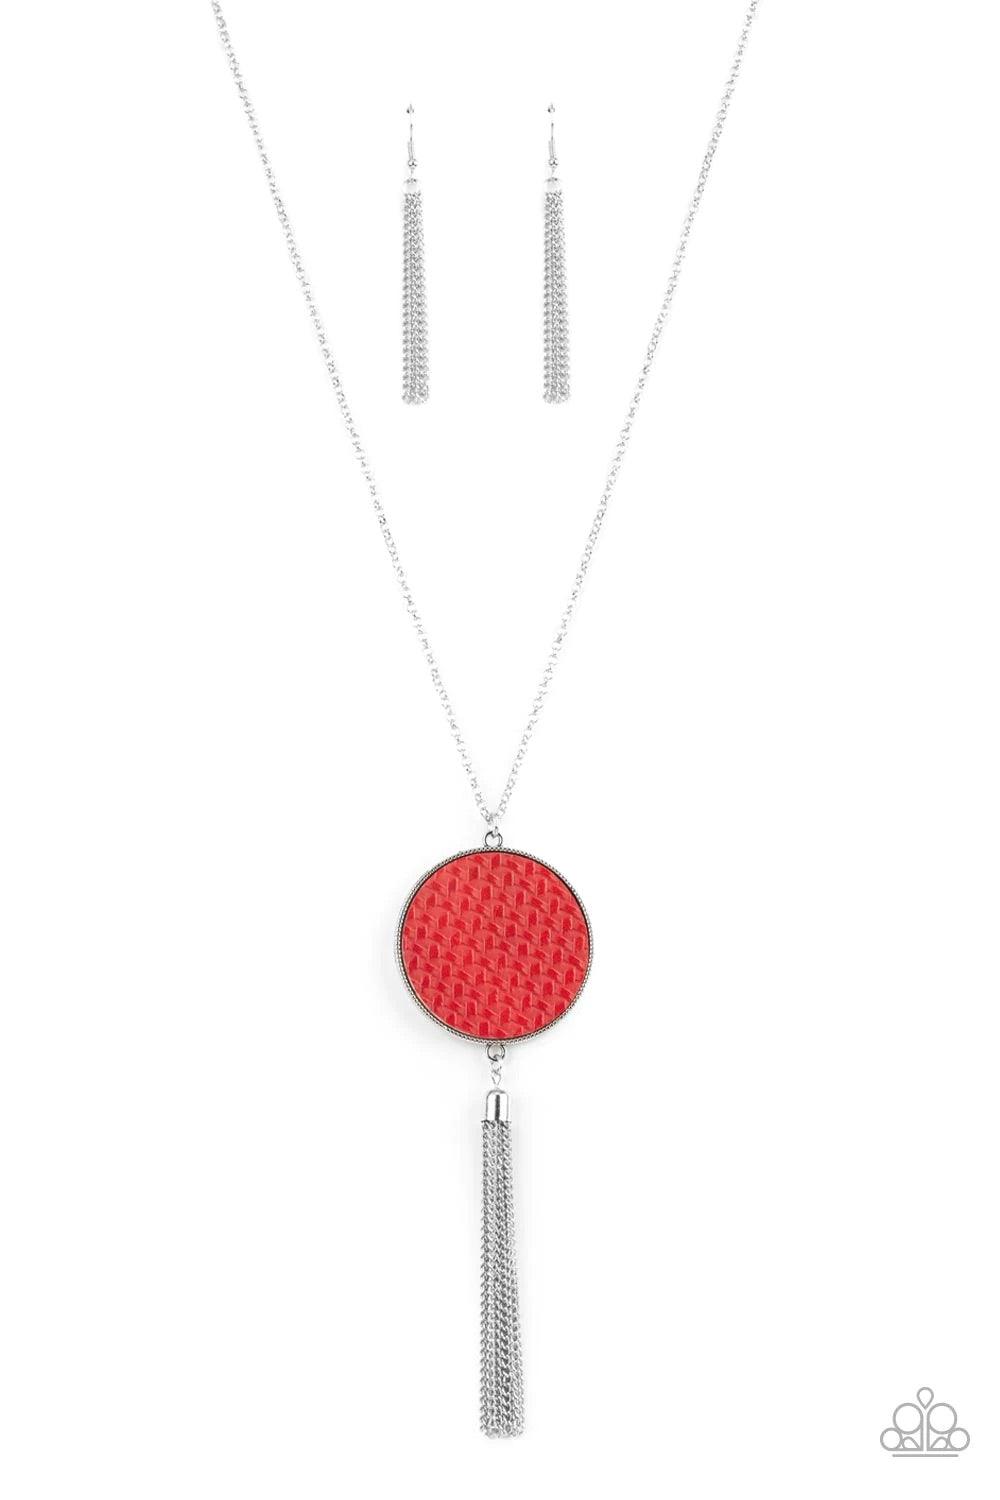 Paparazzi Accessories Wondrously Woven - Red Featuring a faux woven finish, a shiny piece of Fire Whirl leather is pressed into a studded circular frame at the bottom of a lengthened silver chain. Capped in a frame, a silver chain tassel streams out from